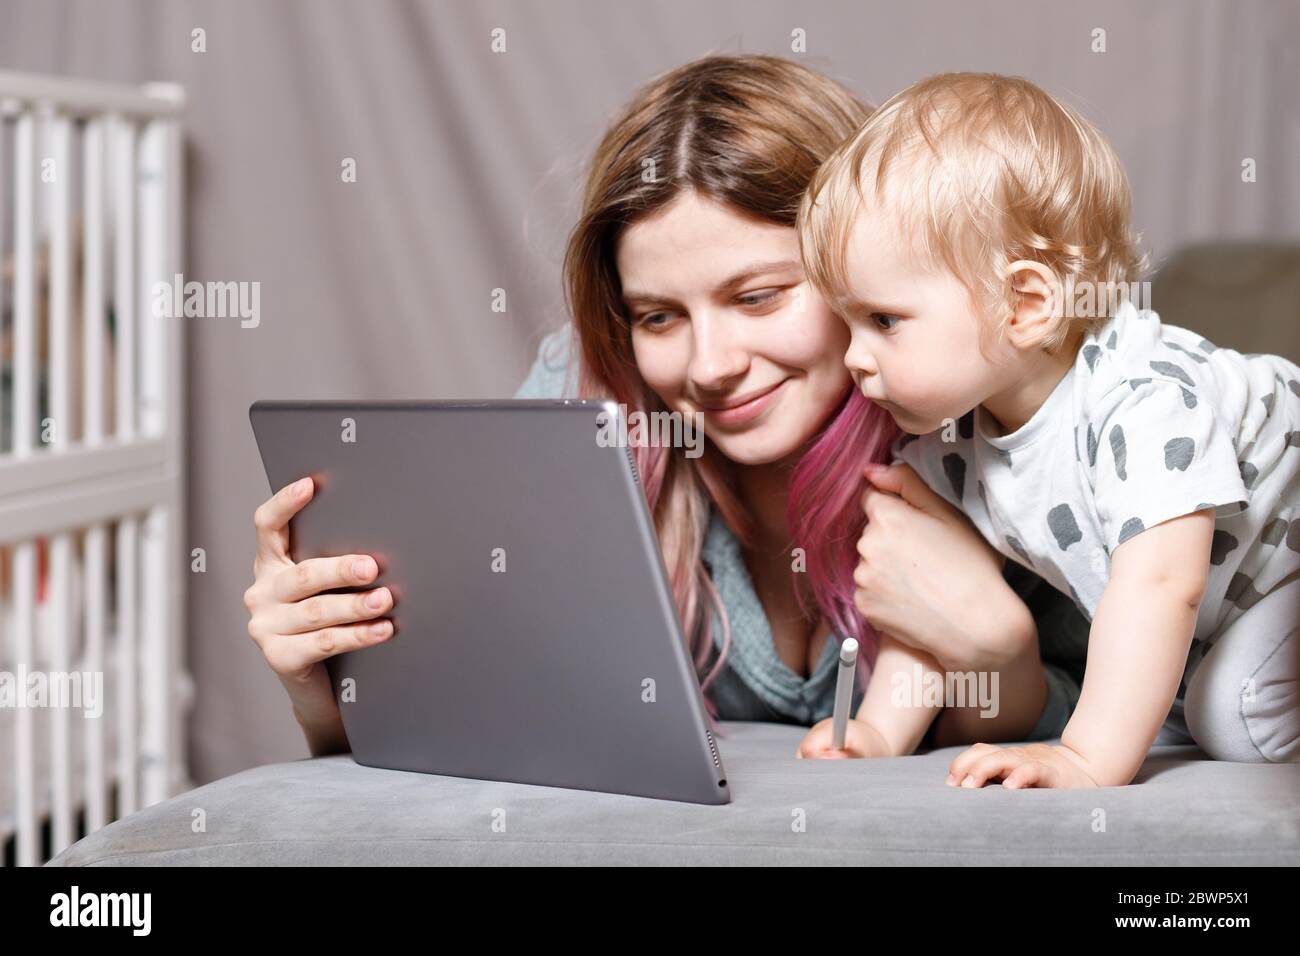 Stay at home, mom works remotely on a laptop computer, taking care of her child. A young mother on maternity leave is trying to work as a freelancer w Stock Photo